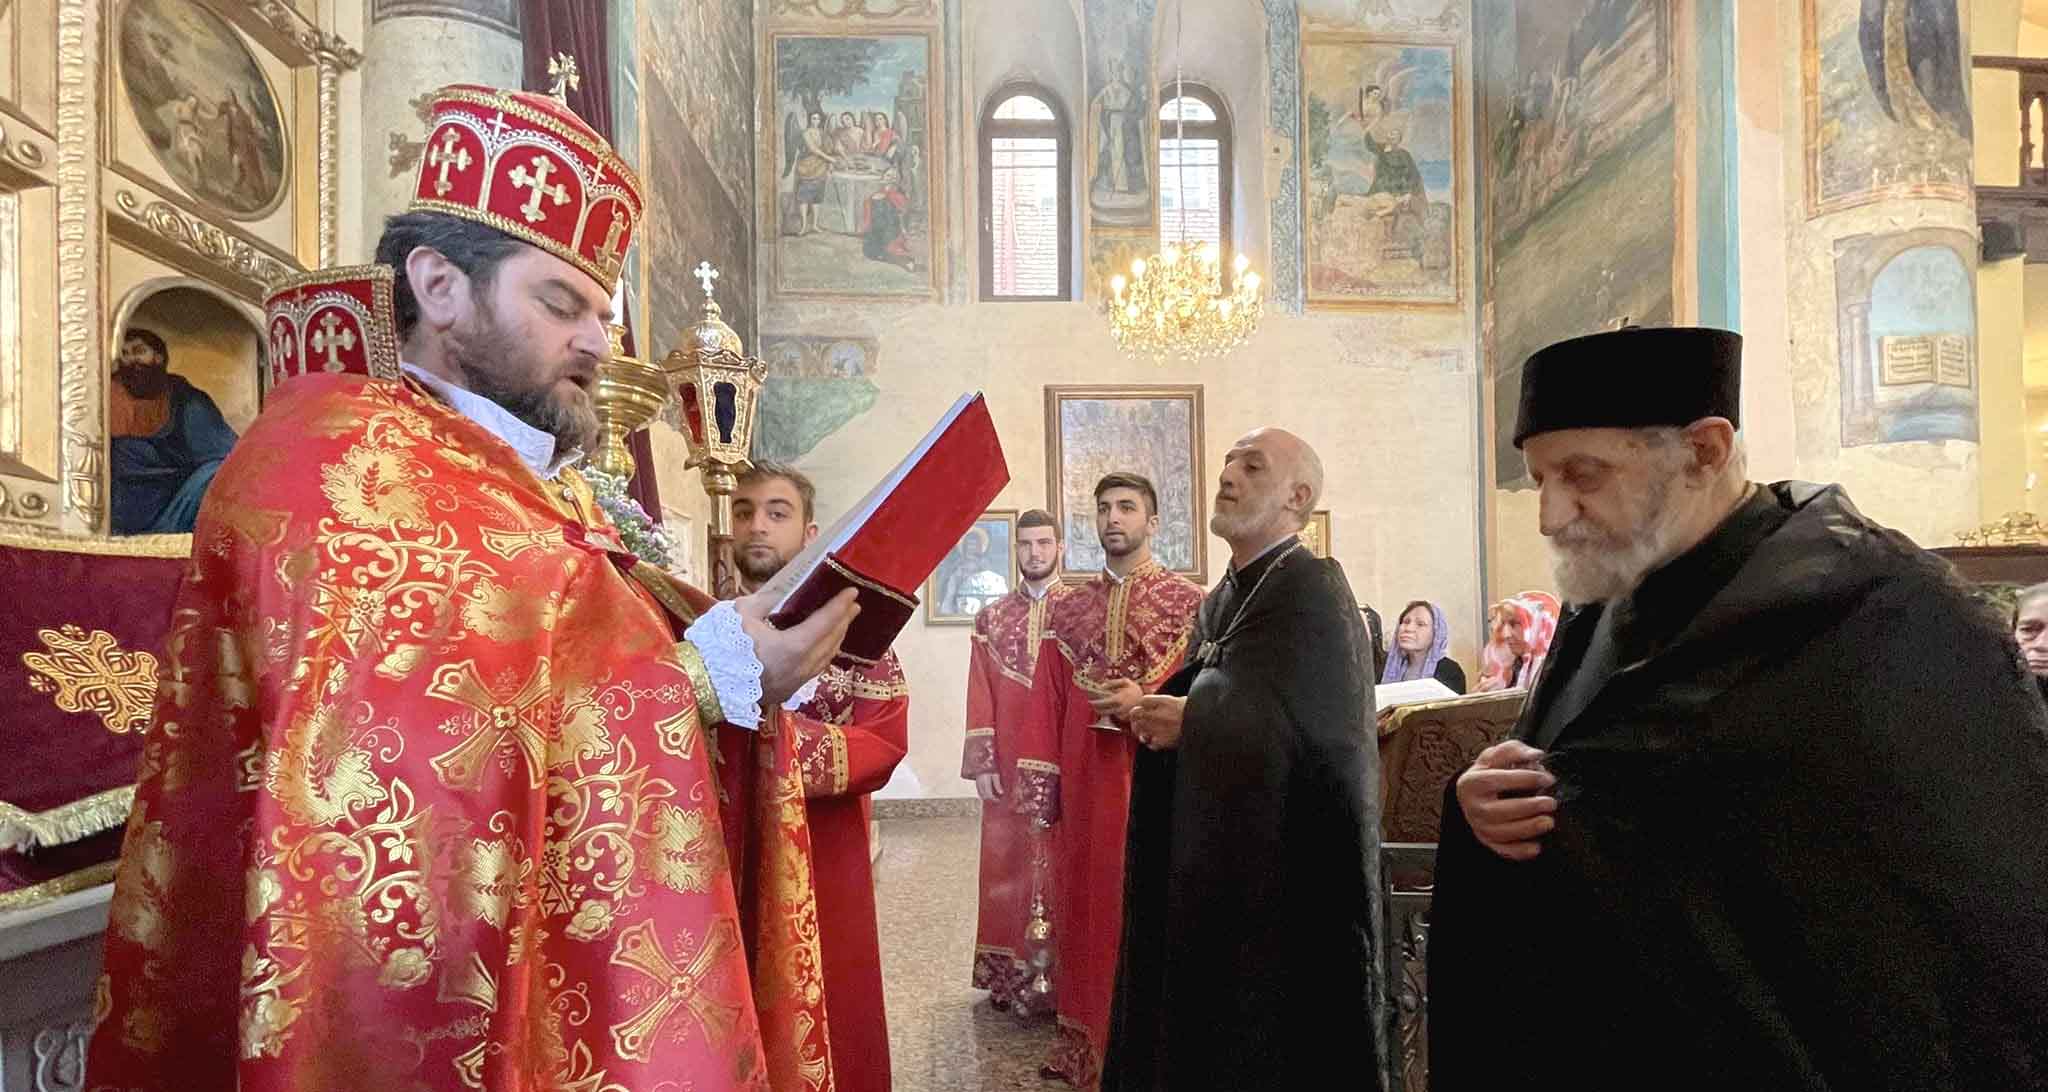 Divine Liturgy dedicated to the Feast of Varaga Holy Cross and Repose of Souls Service was offered for the victims of the 44-day War